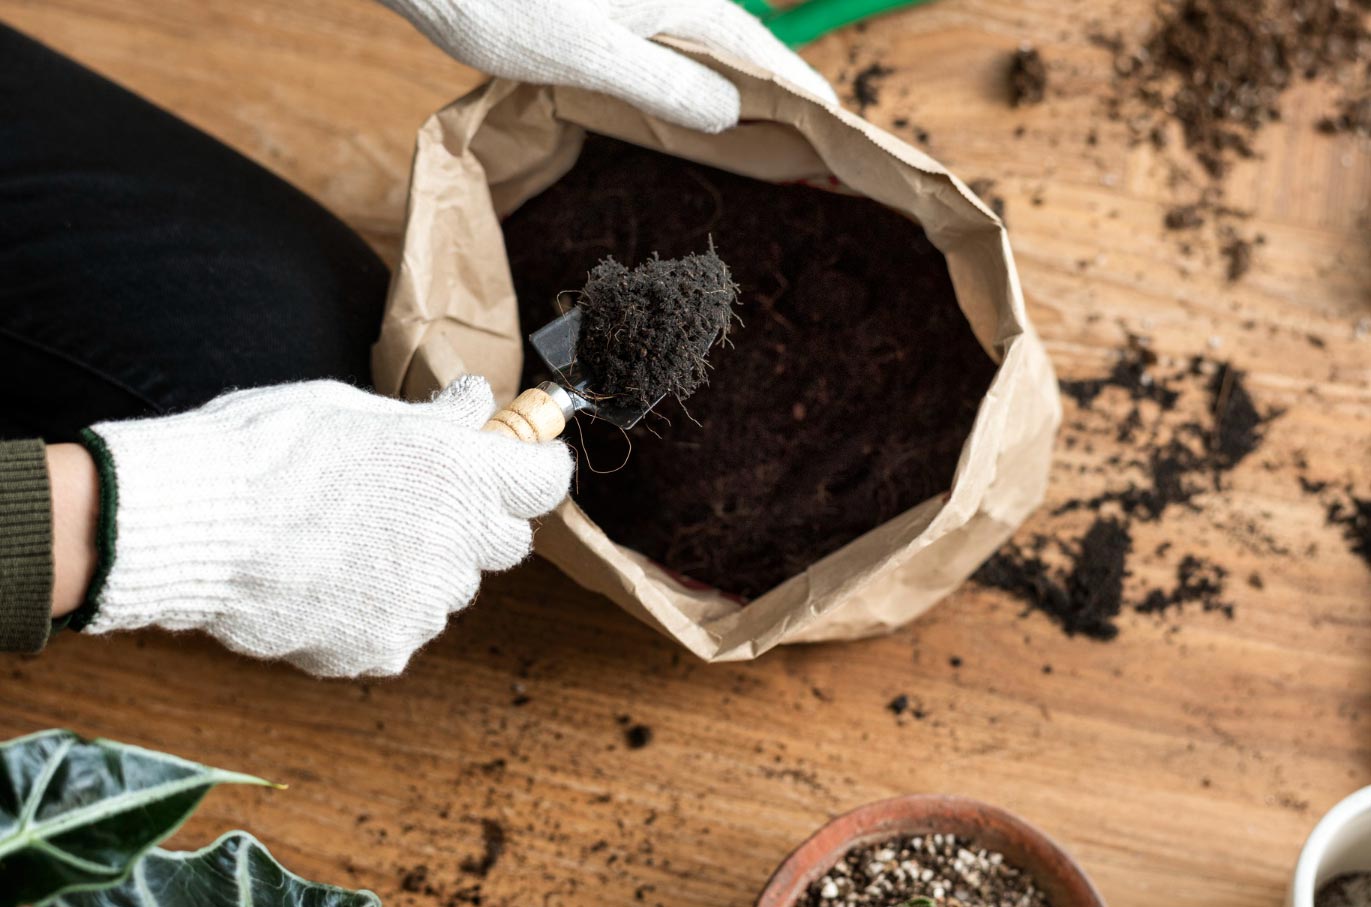 A person with gloves doing indoor gardening and taking soil out of the bag